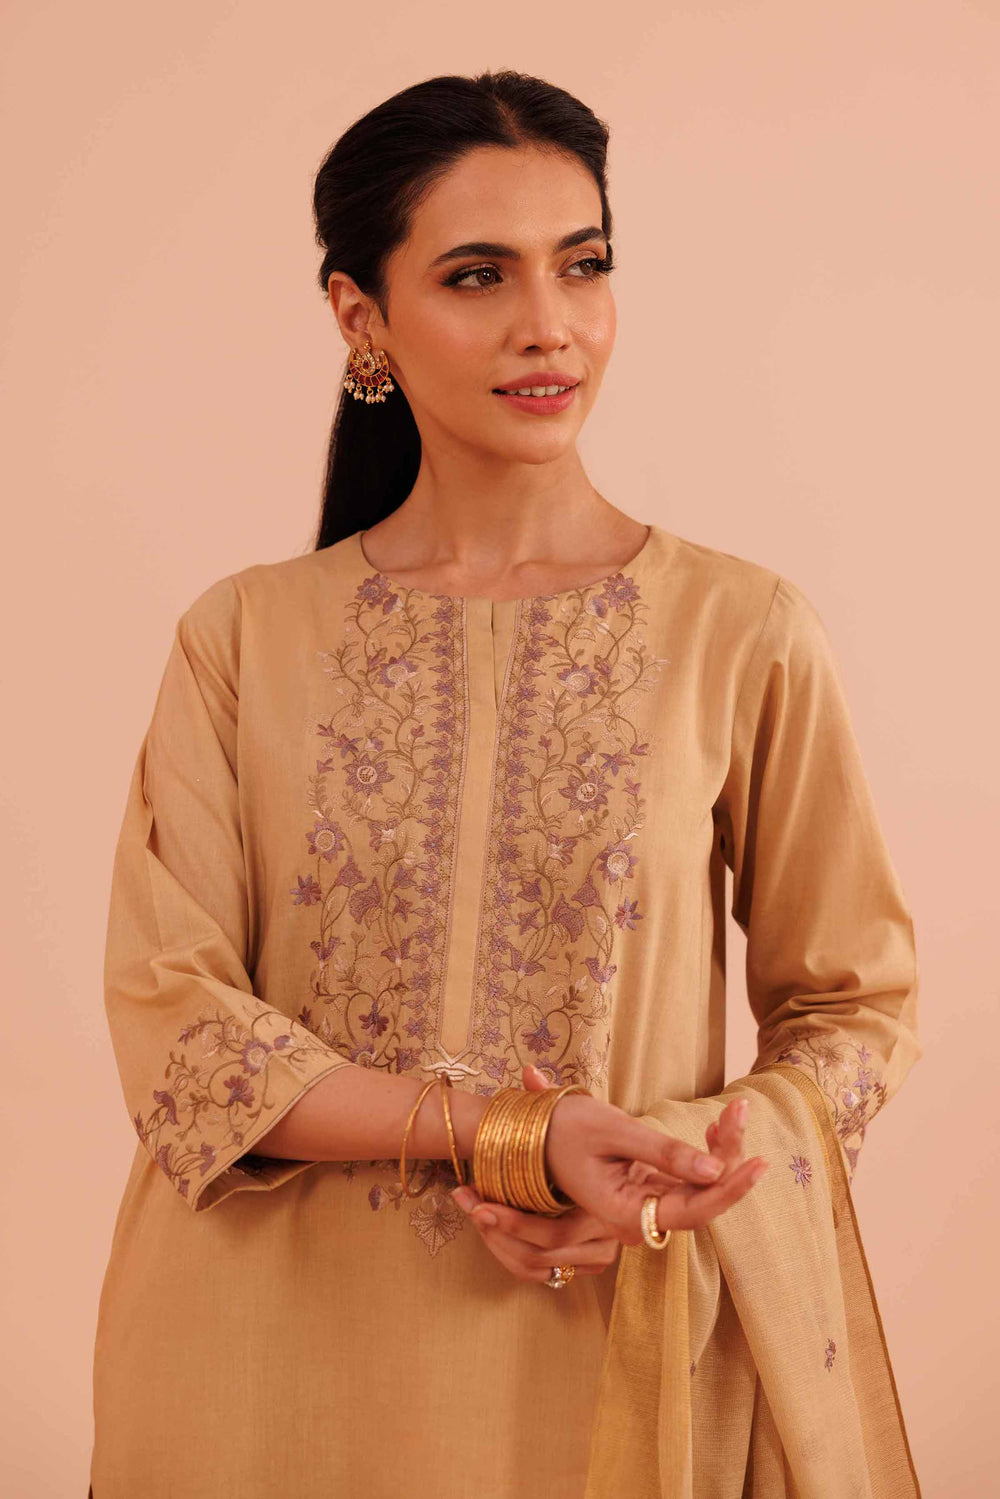 Embroidered Gold 3 Piece Suit - Nishat